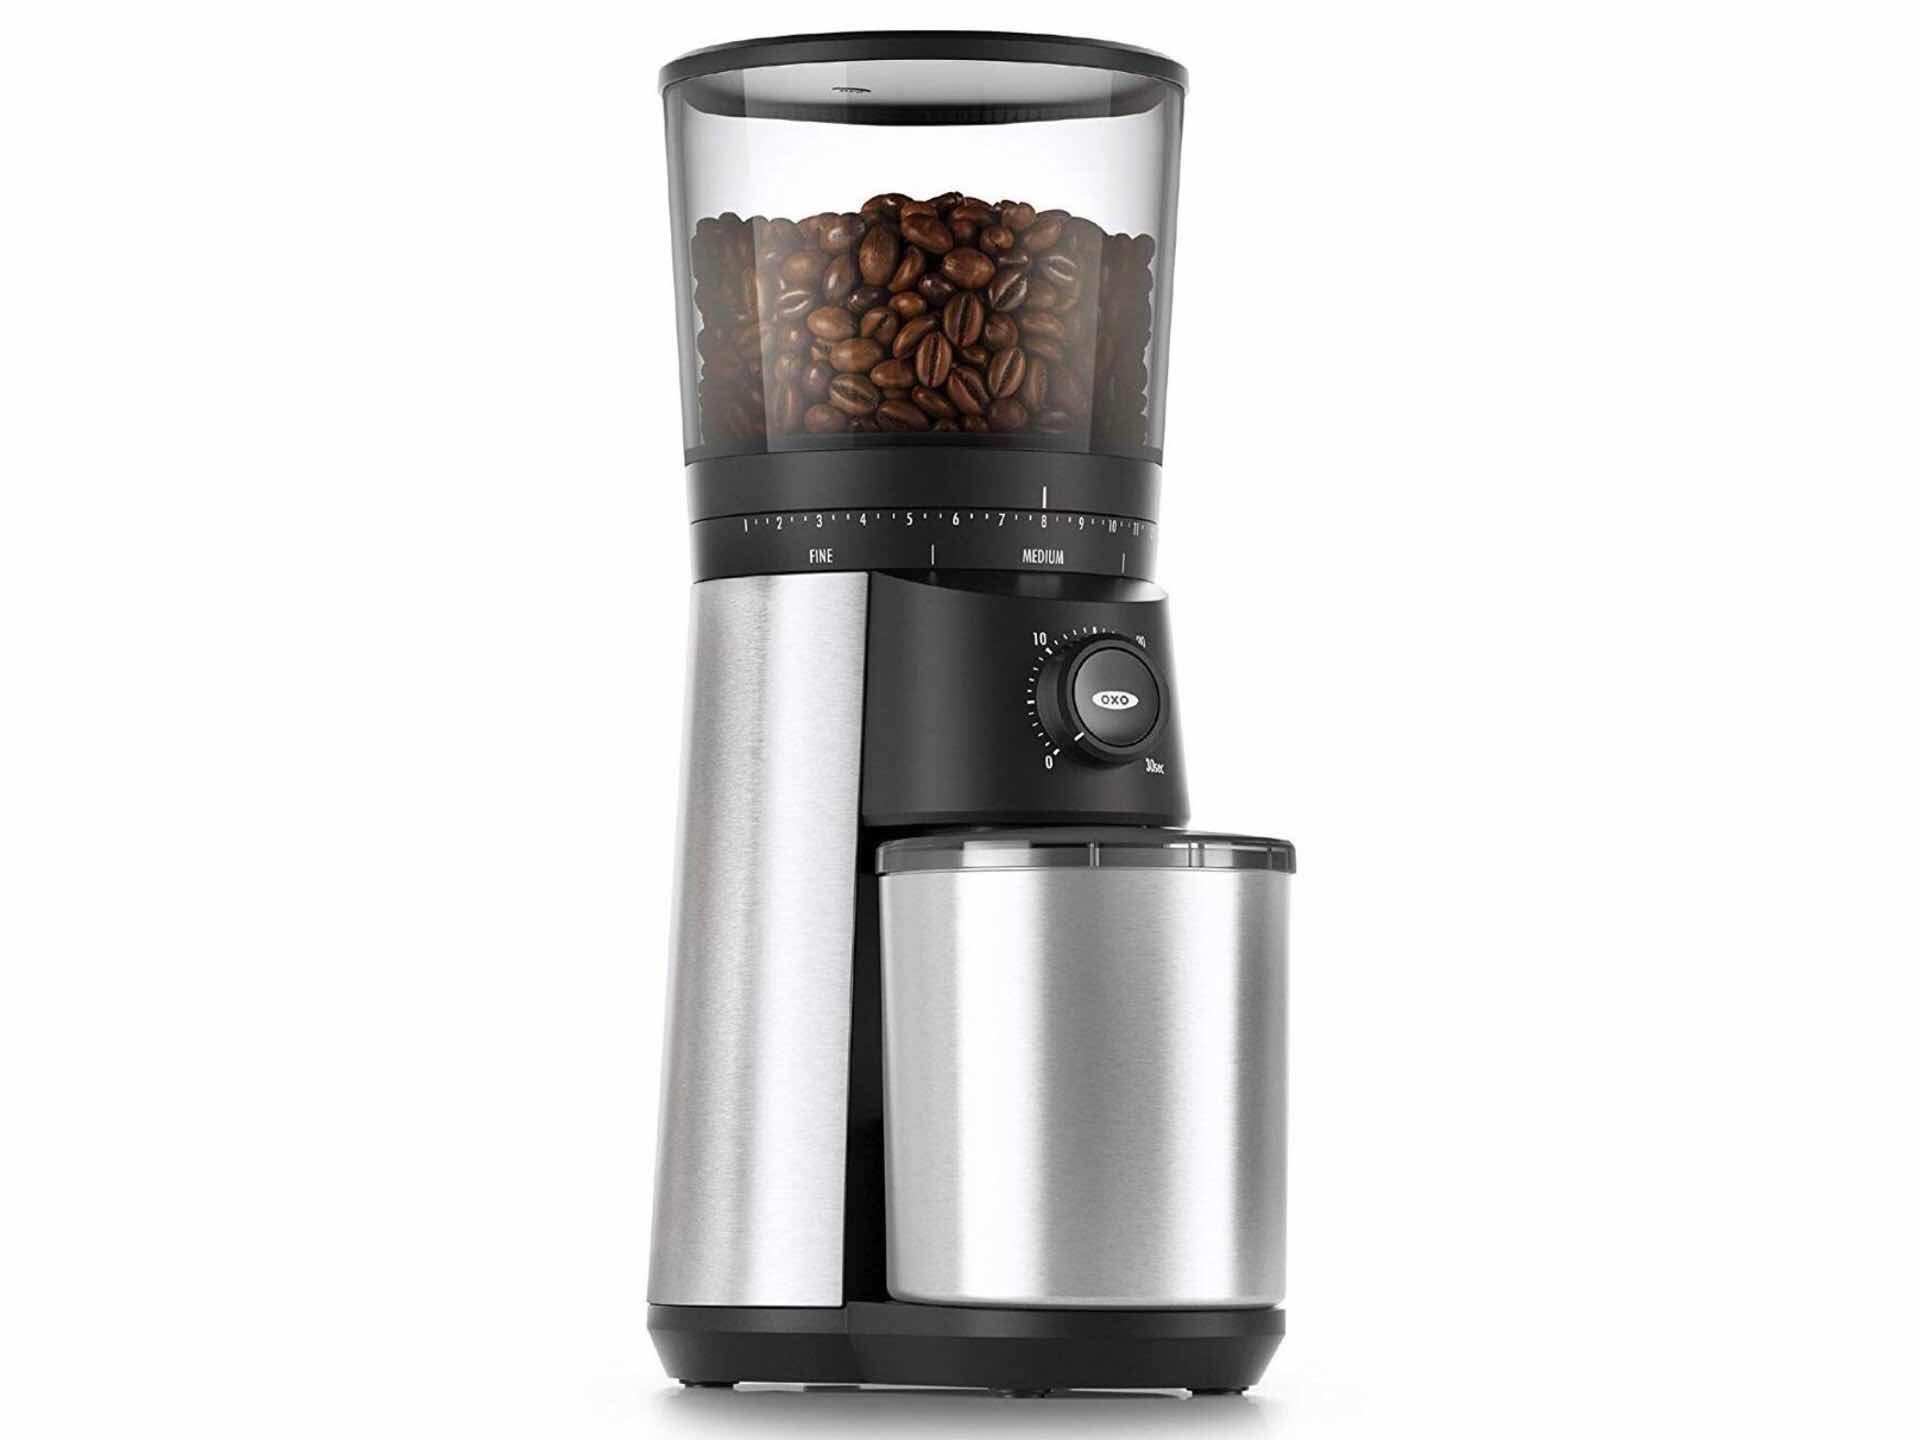 OXO Brew conical burr grinder. ($100 for grinder alone, or $179 for version with integrated scale)